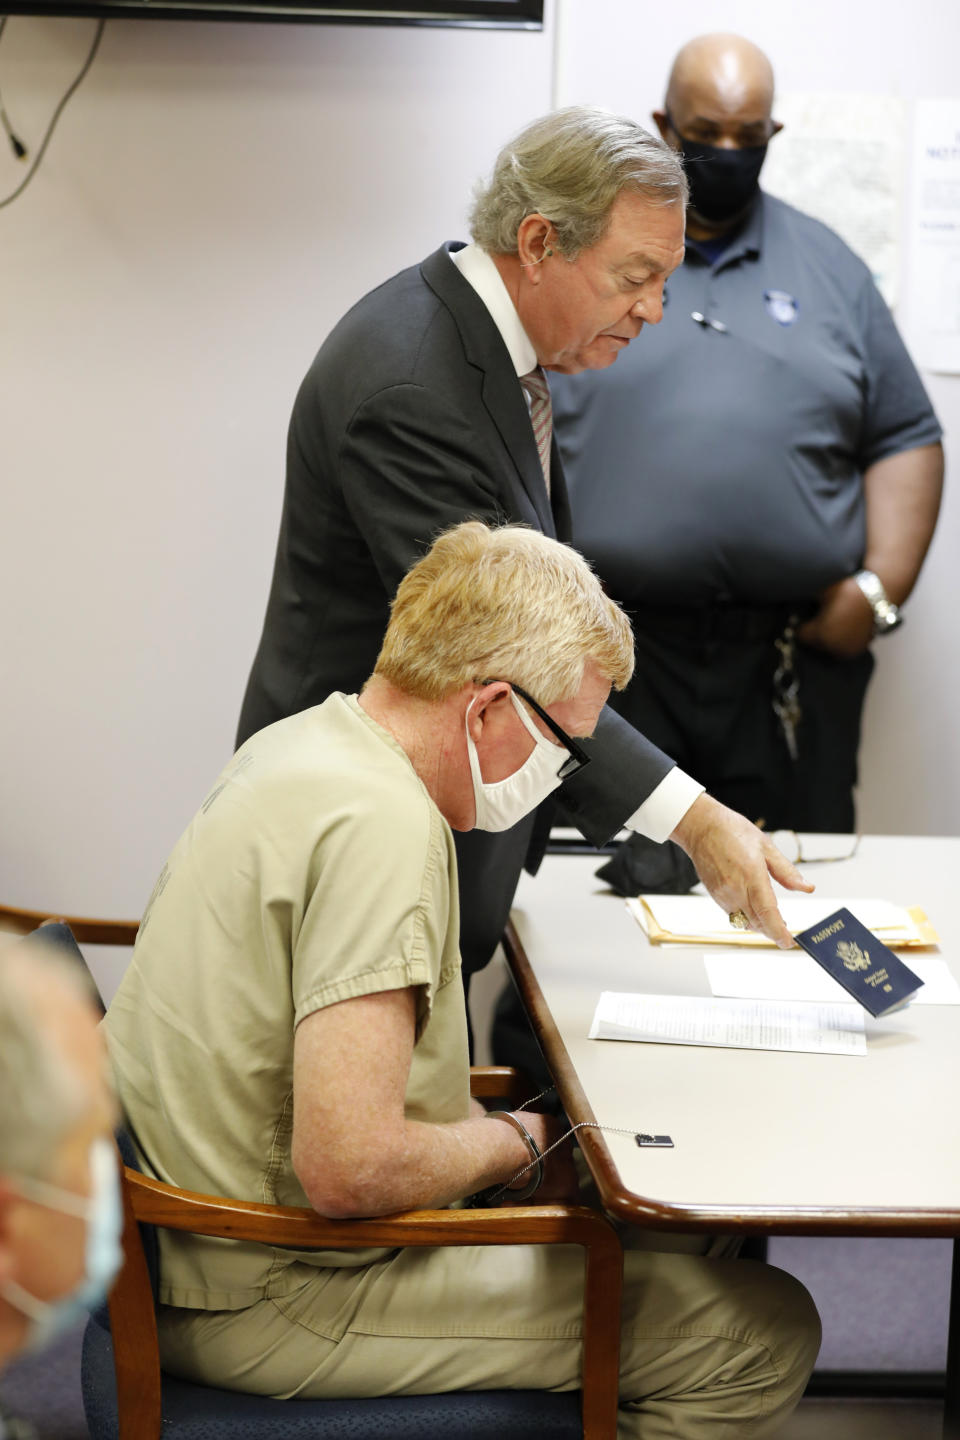 Alex Murdaugh's attorney, Dick Harpootlian, hands over Alex Murdaugh's passport during his bond hearing, Thursday, Sept. 16, 2021, in Varnville, S.C. Murdaugh surrendered Thursday to face insurance fraud and other charges after state police said he arranged to have himself shot in the head so that his son would get a $10 million life insurance payout. (AP Photo/Mic Smith)